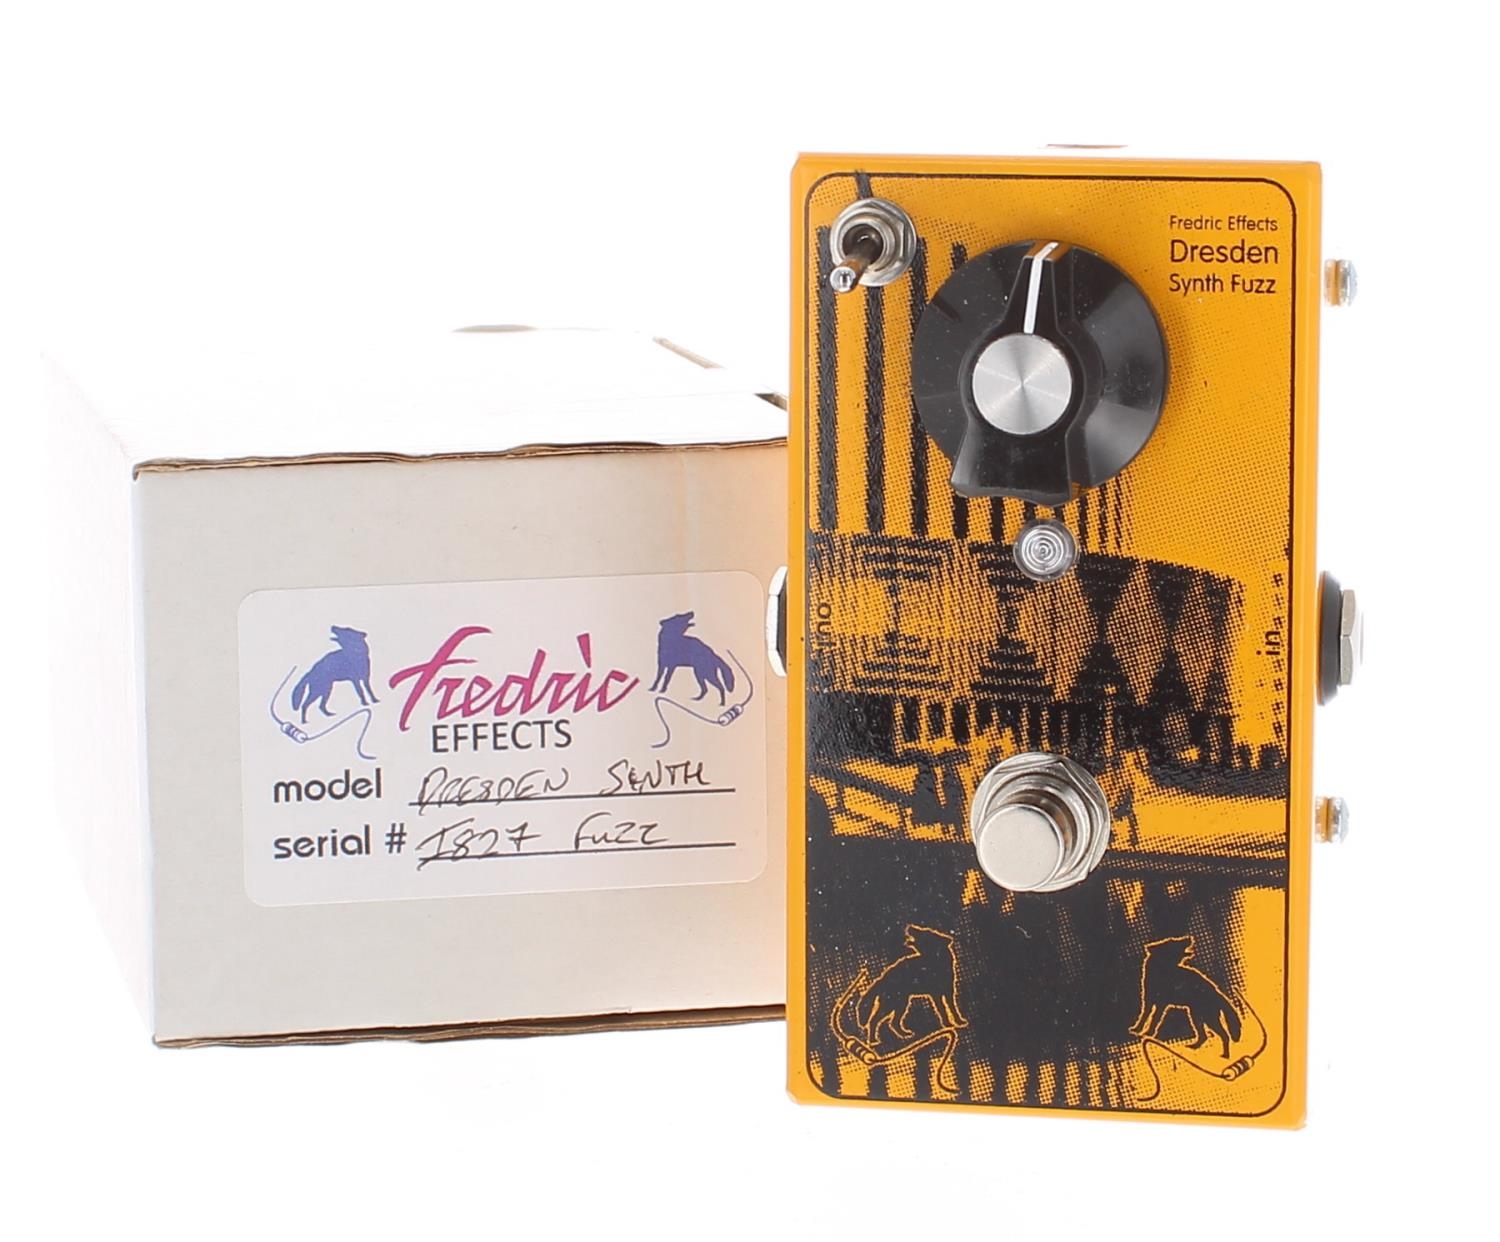 New and boxed - Fredric Effects Dresden Synth Fuzz guitar pedal